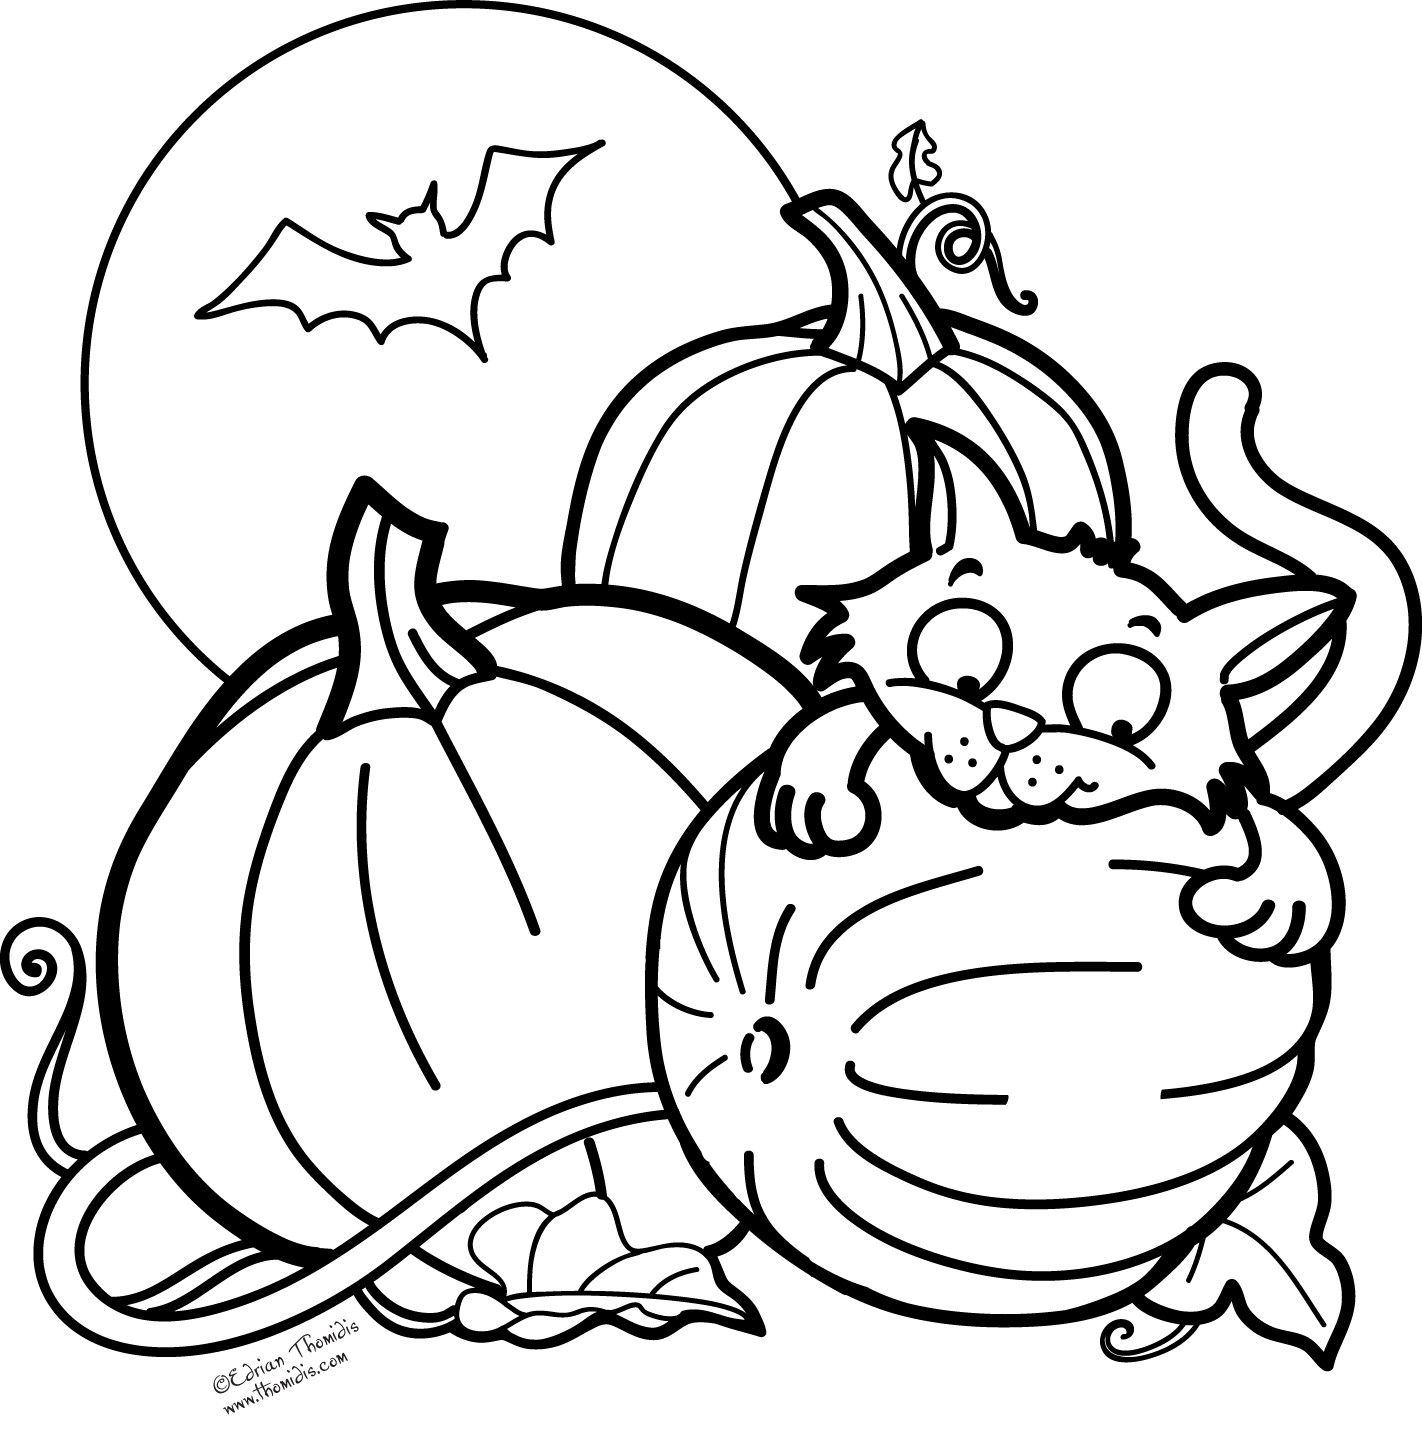 Fall Coloring Pages Free Printable
 A picture paints a thousand words